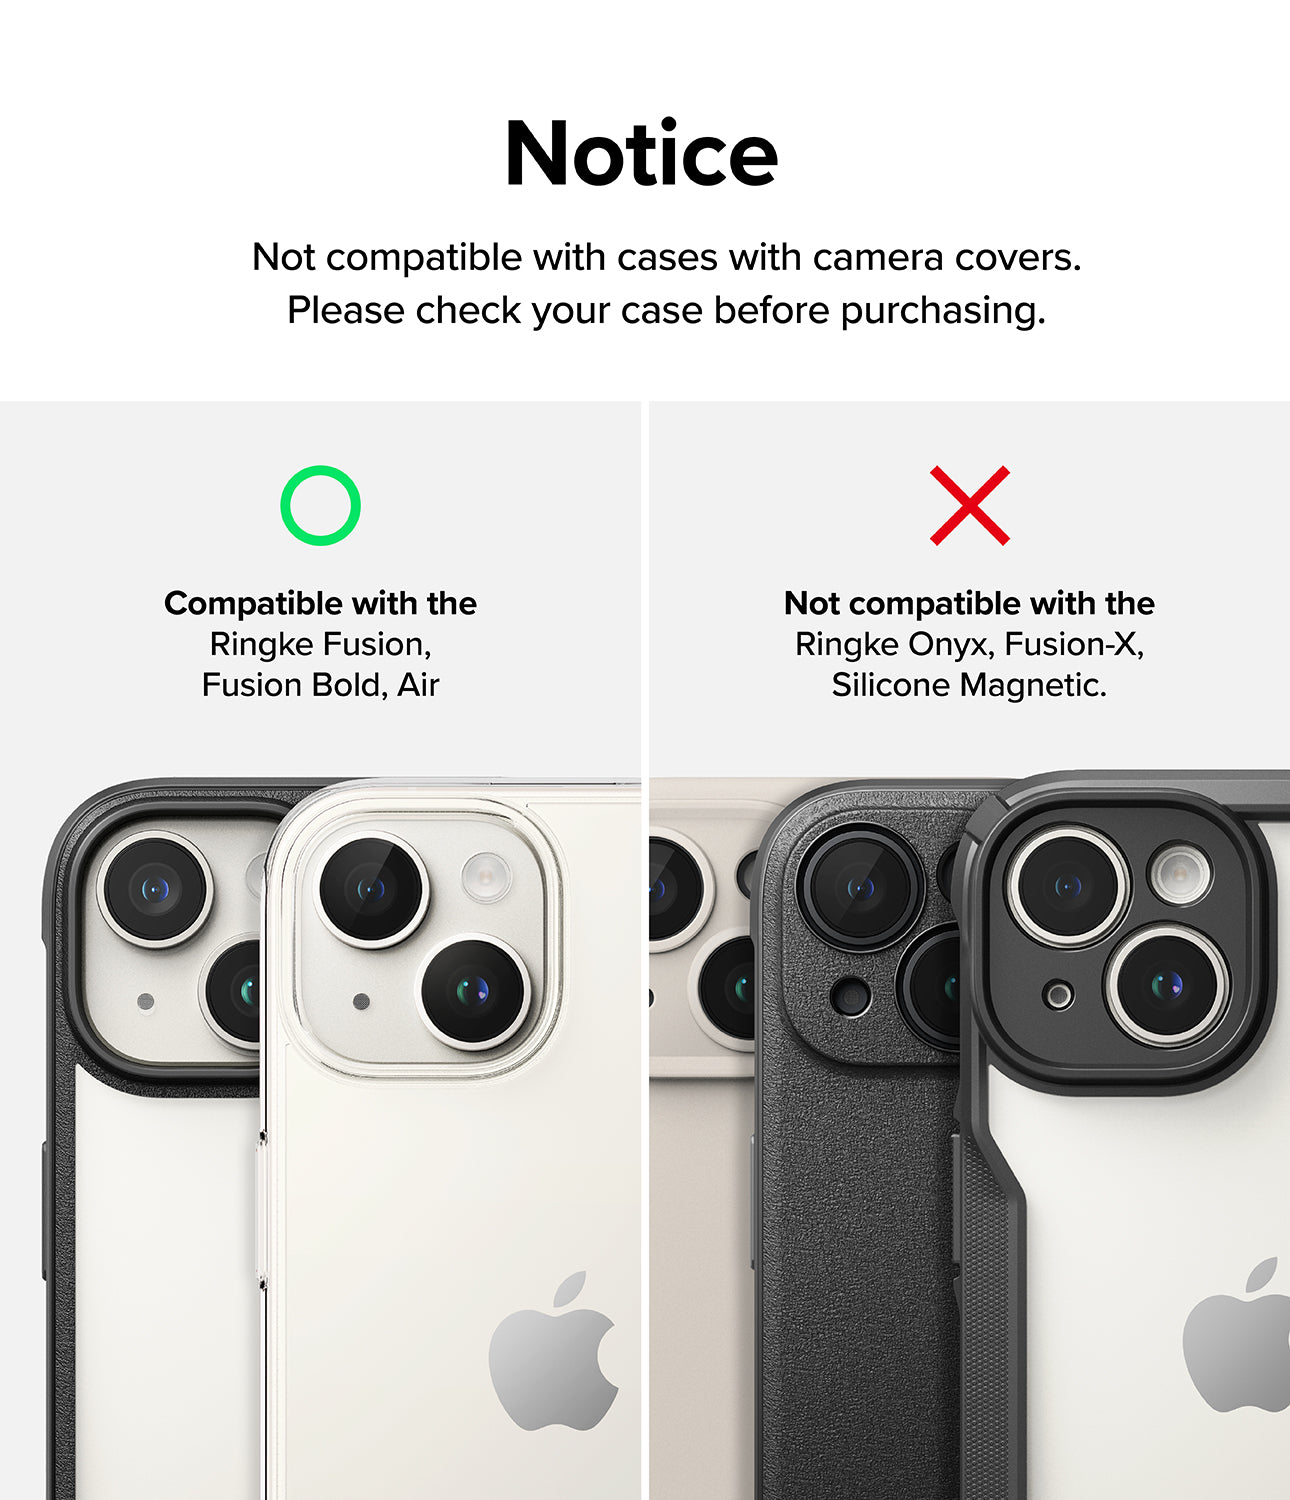 iPhone 15 Plus / iPhone 15 | Camera Styling - Black aluminum metallic cover. Notice. Not compatible with cases with camera covers. Please check your case before purchasing. Compatible with the Ringke Fusion, Fusion Bold, and Air. Not compatible with the Ringke Onyx, Fusion-X, Silicone Magnetic.